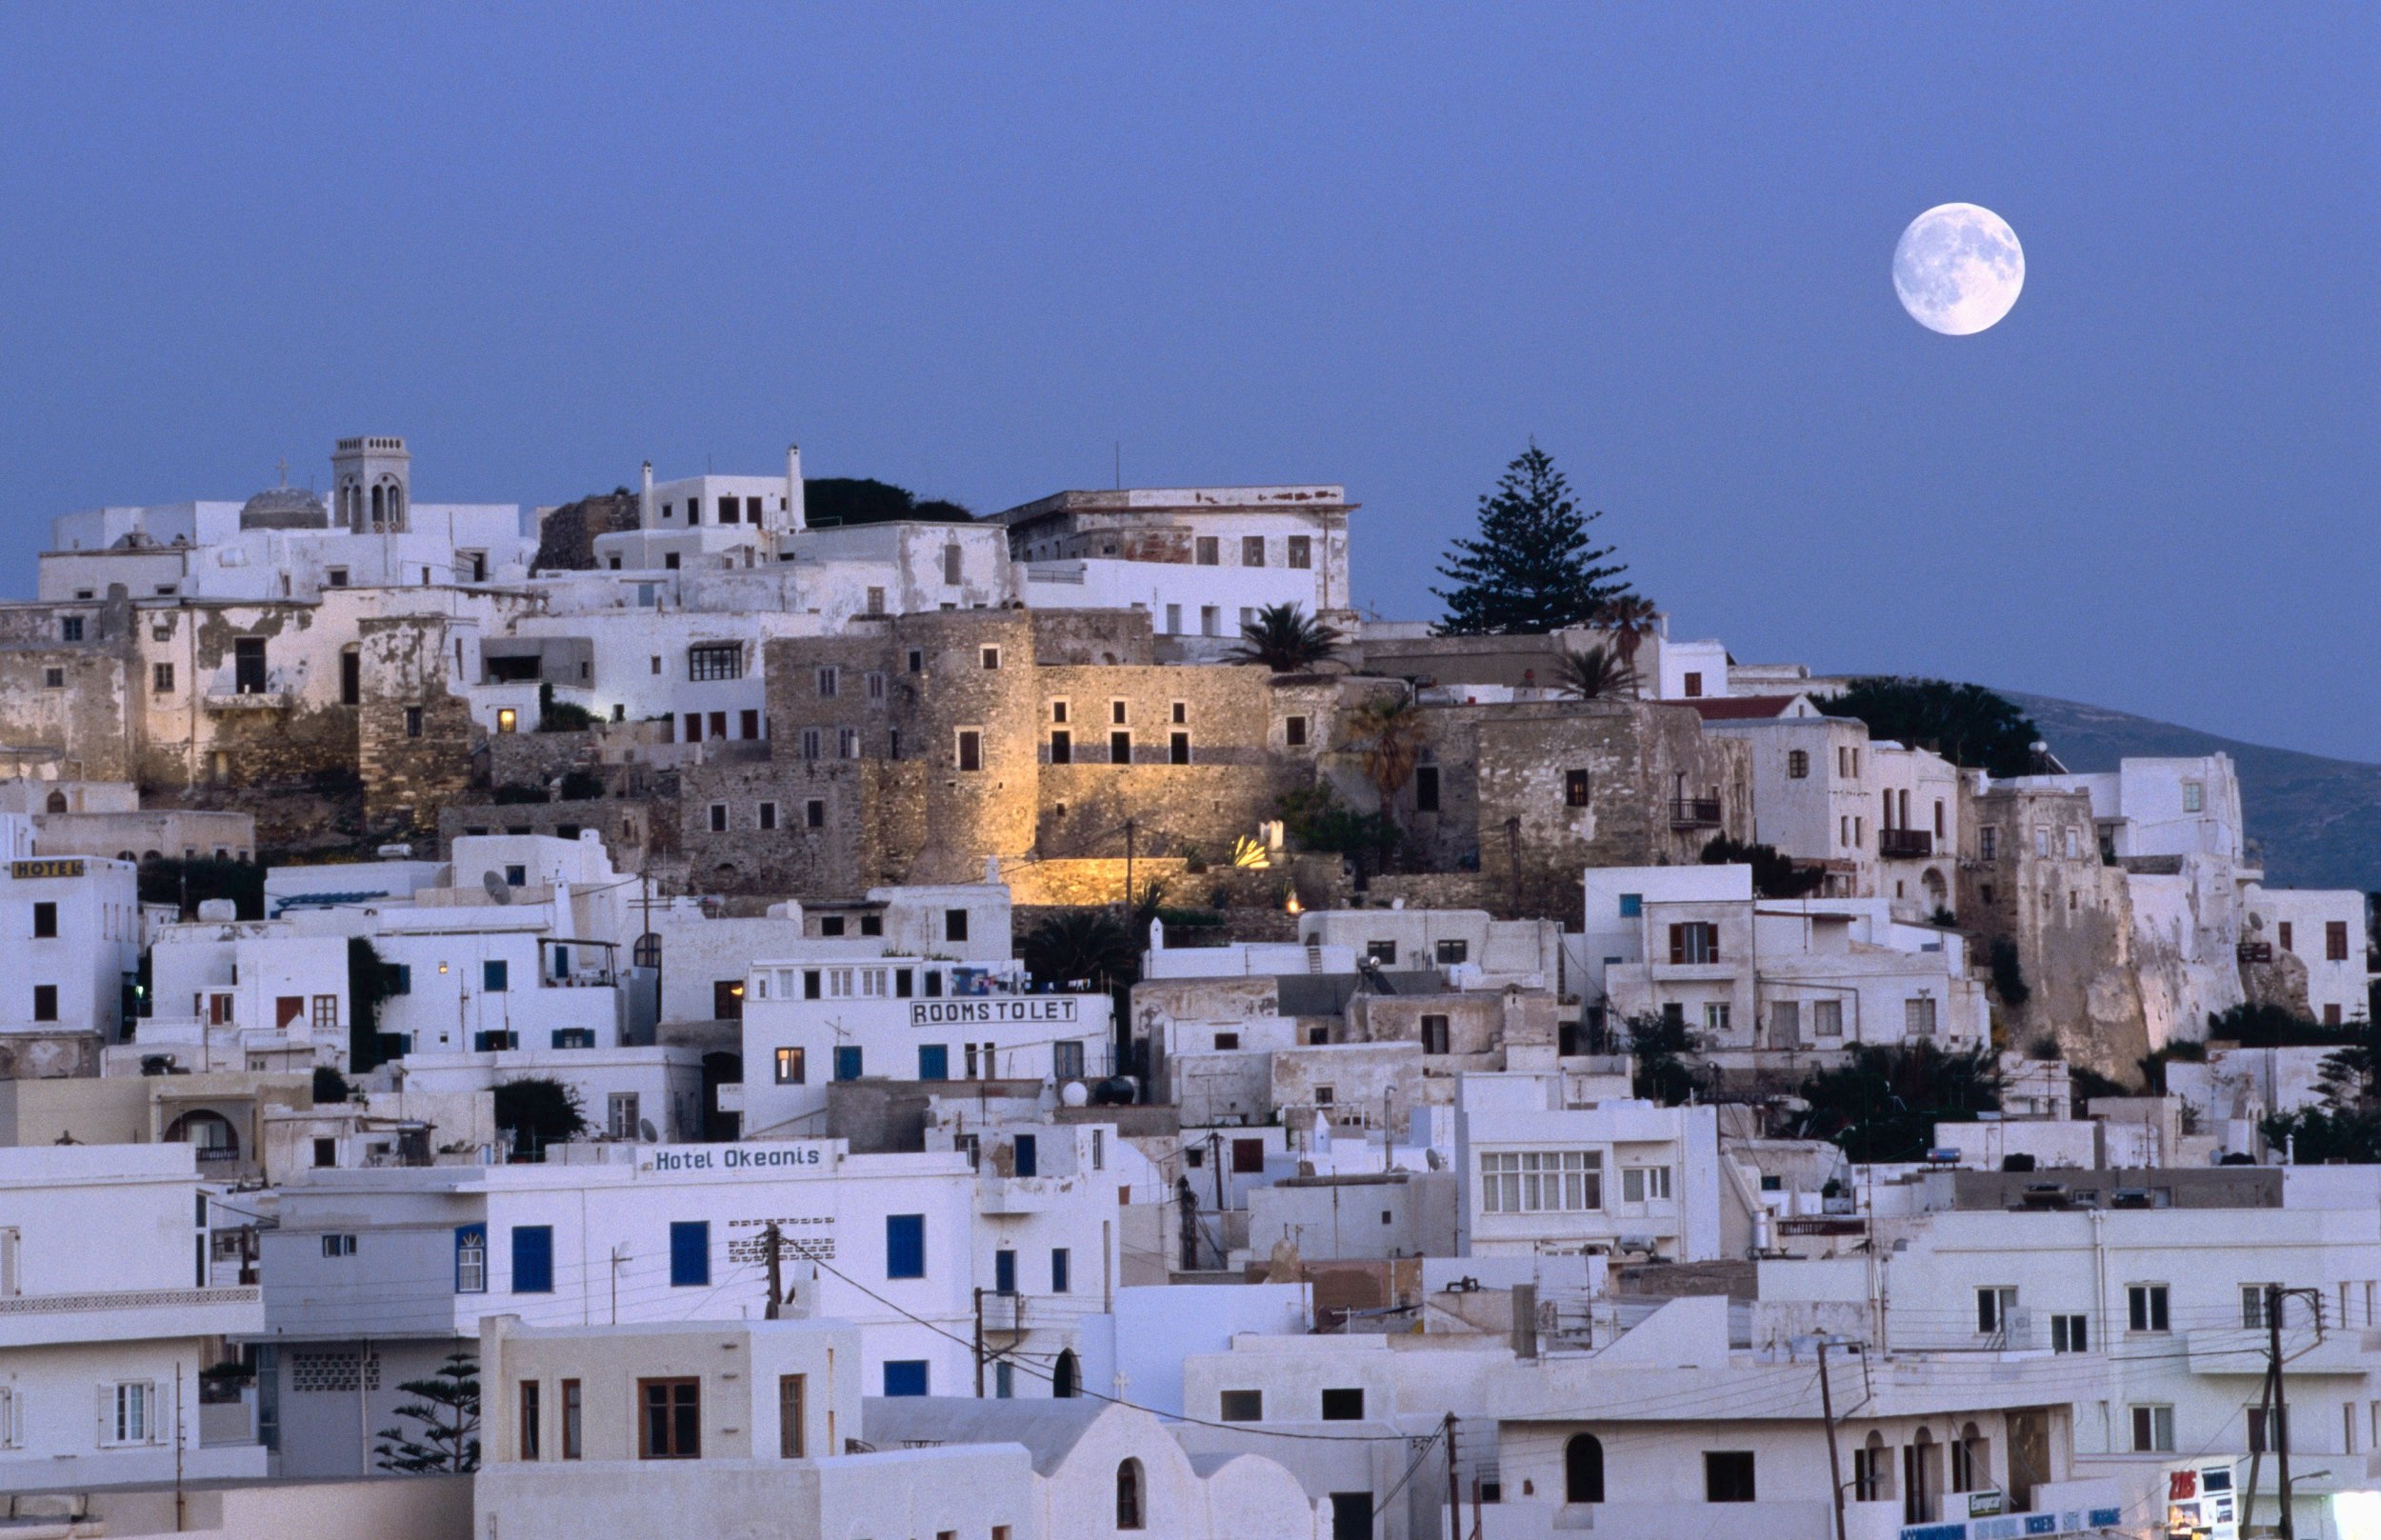 A full moon over a town of boxy white buildings packed together on a hillside. A castle structure sits in the middle.